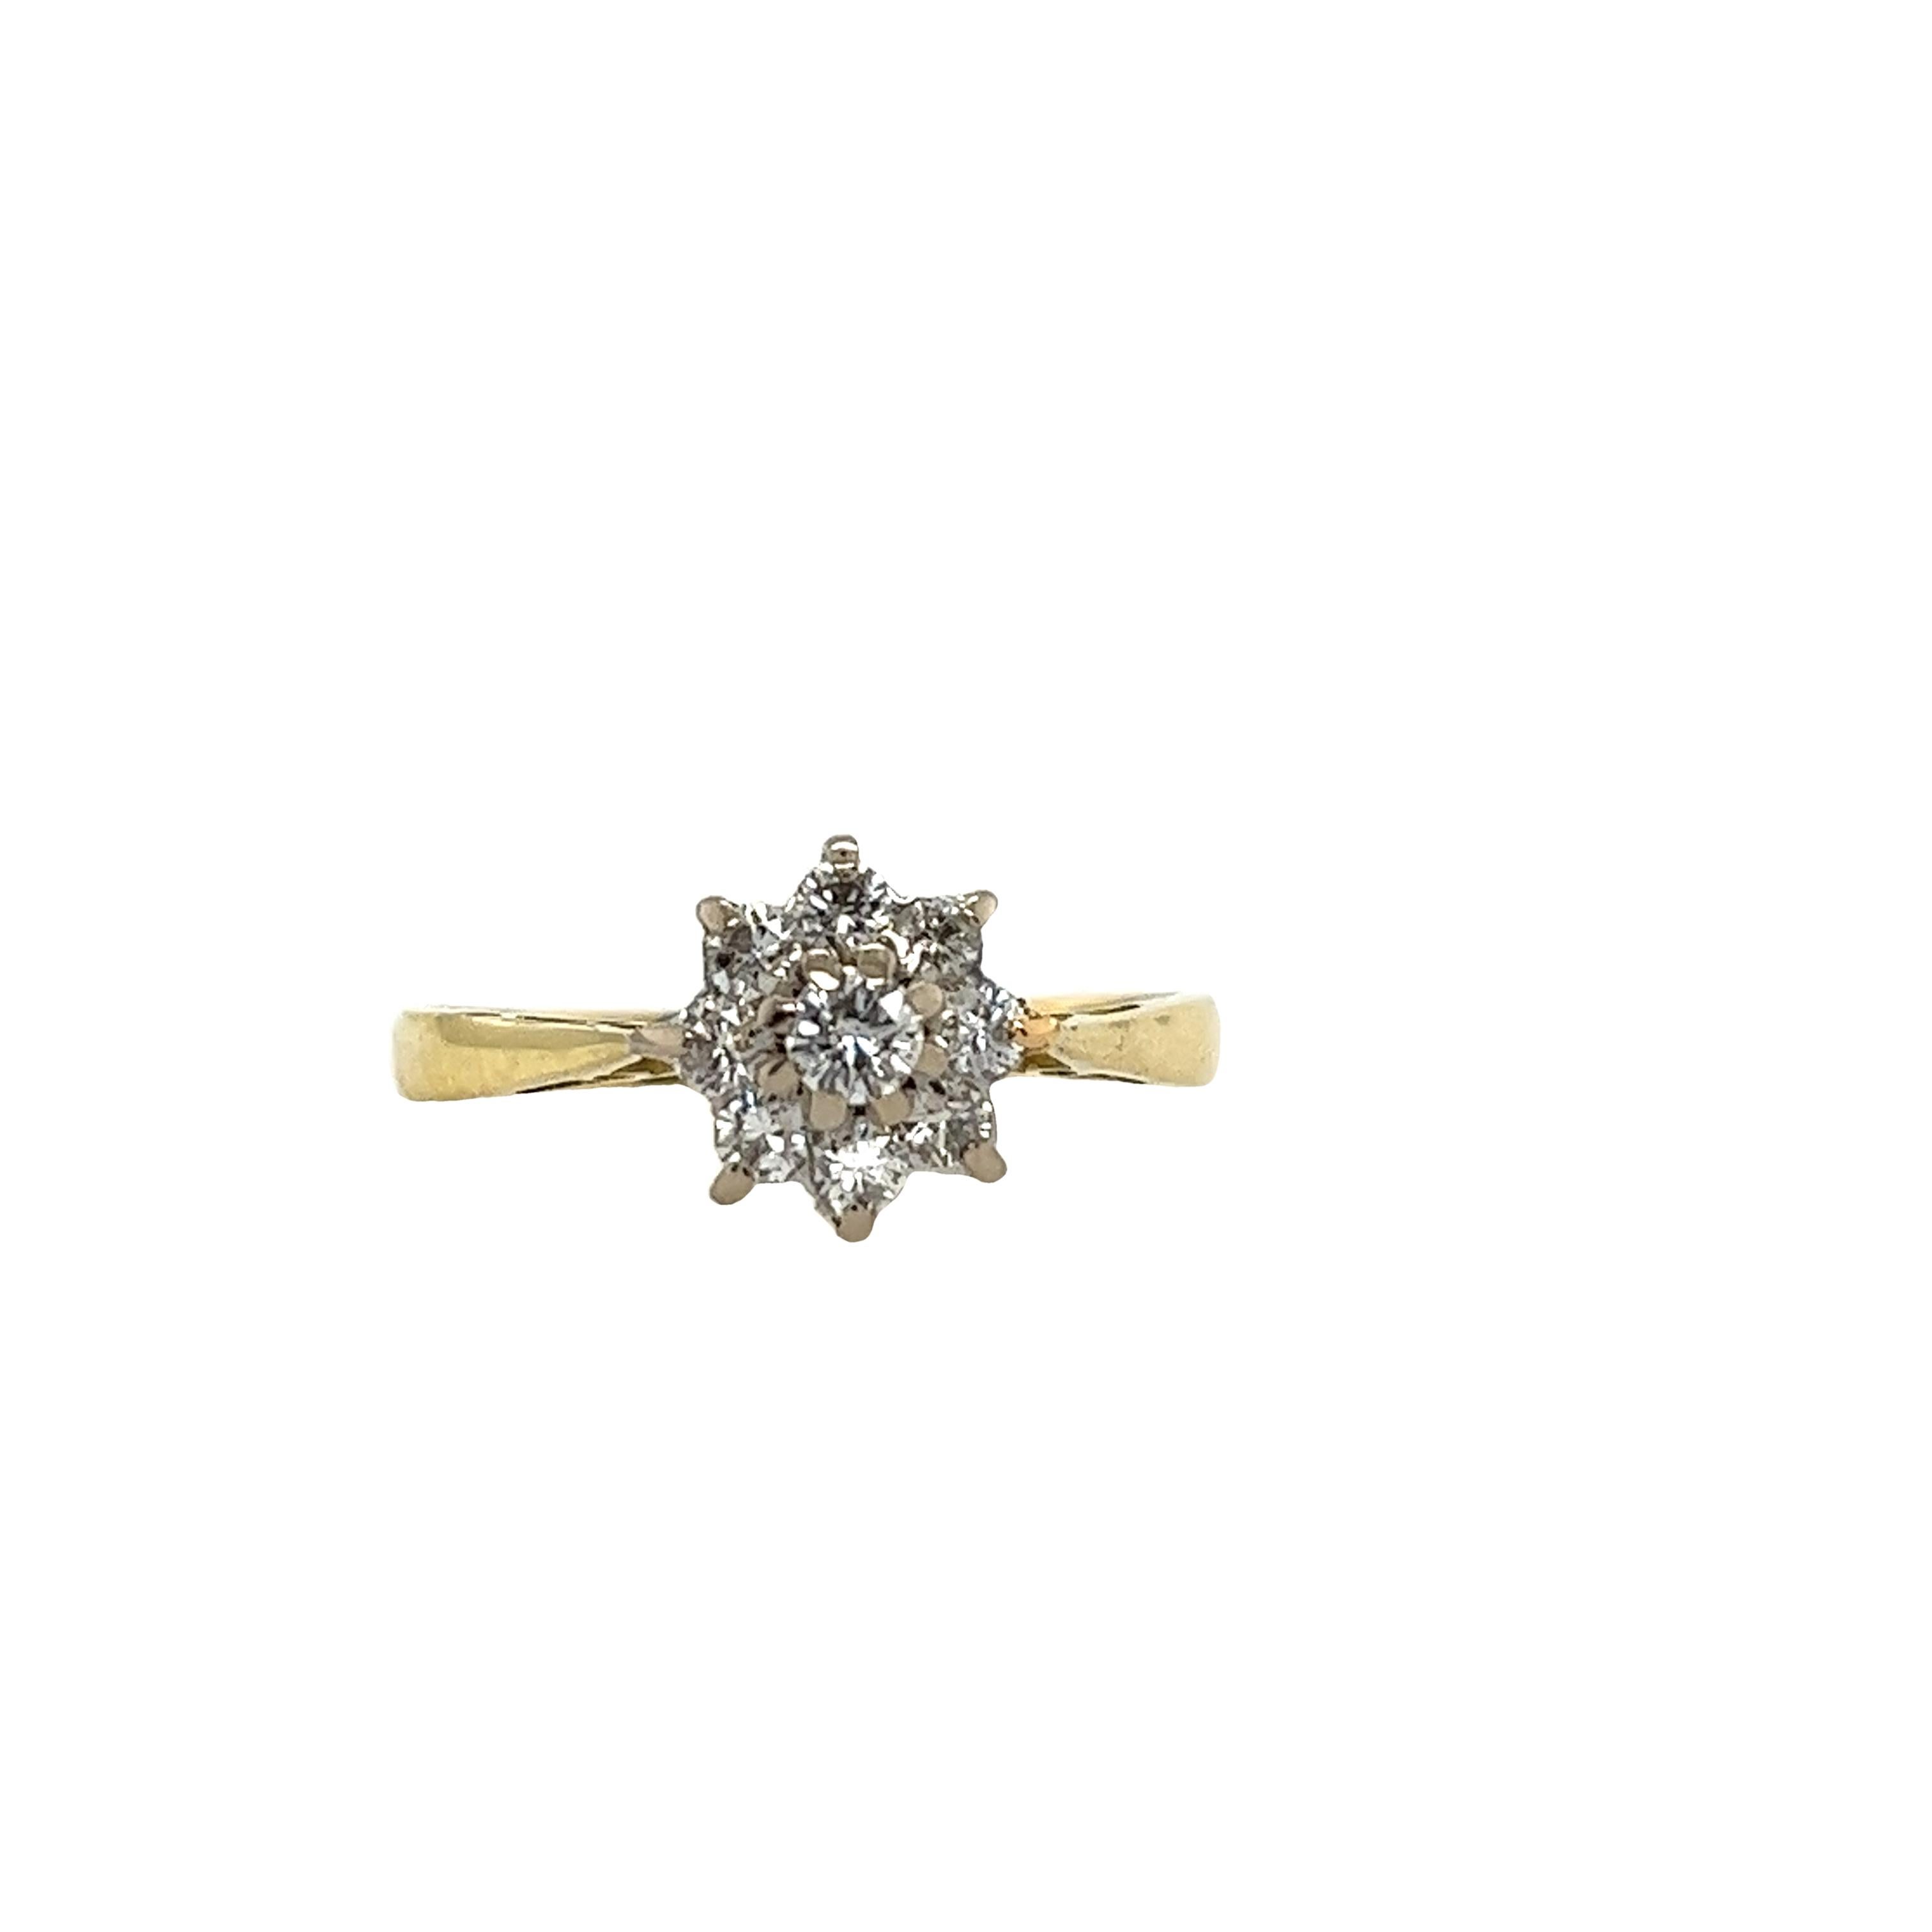 18ct Yellow & White Gold Diamond Cluster Ring, Set With 2.25ct Round Diamonds For Sale 1